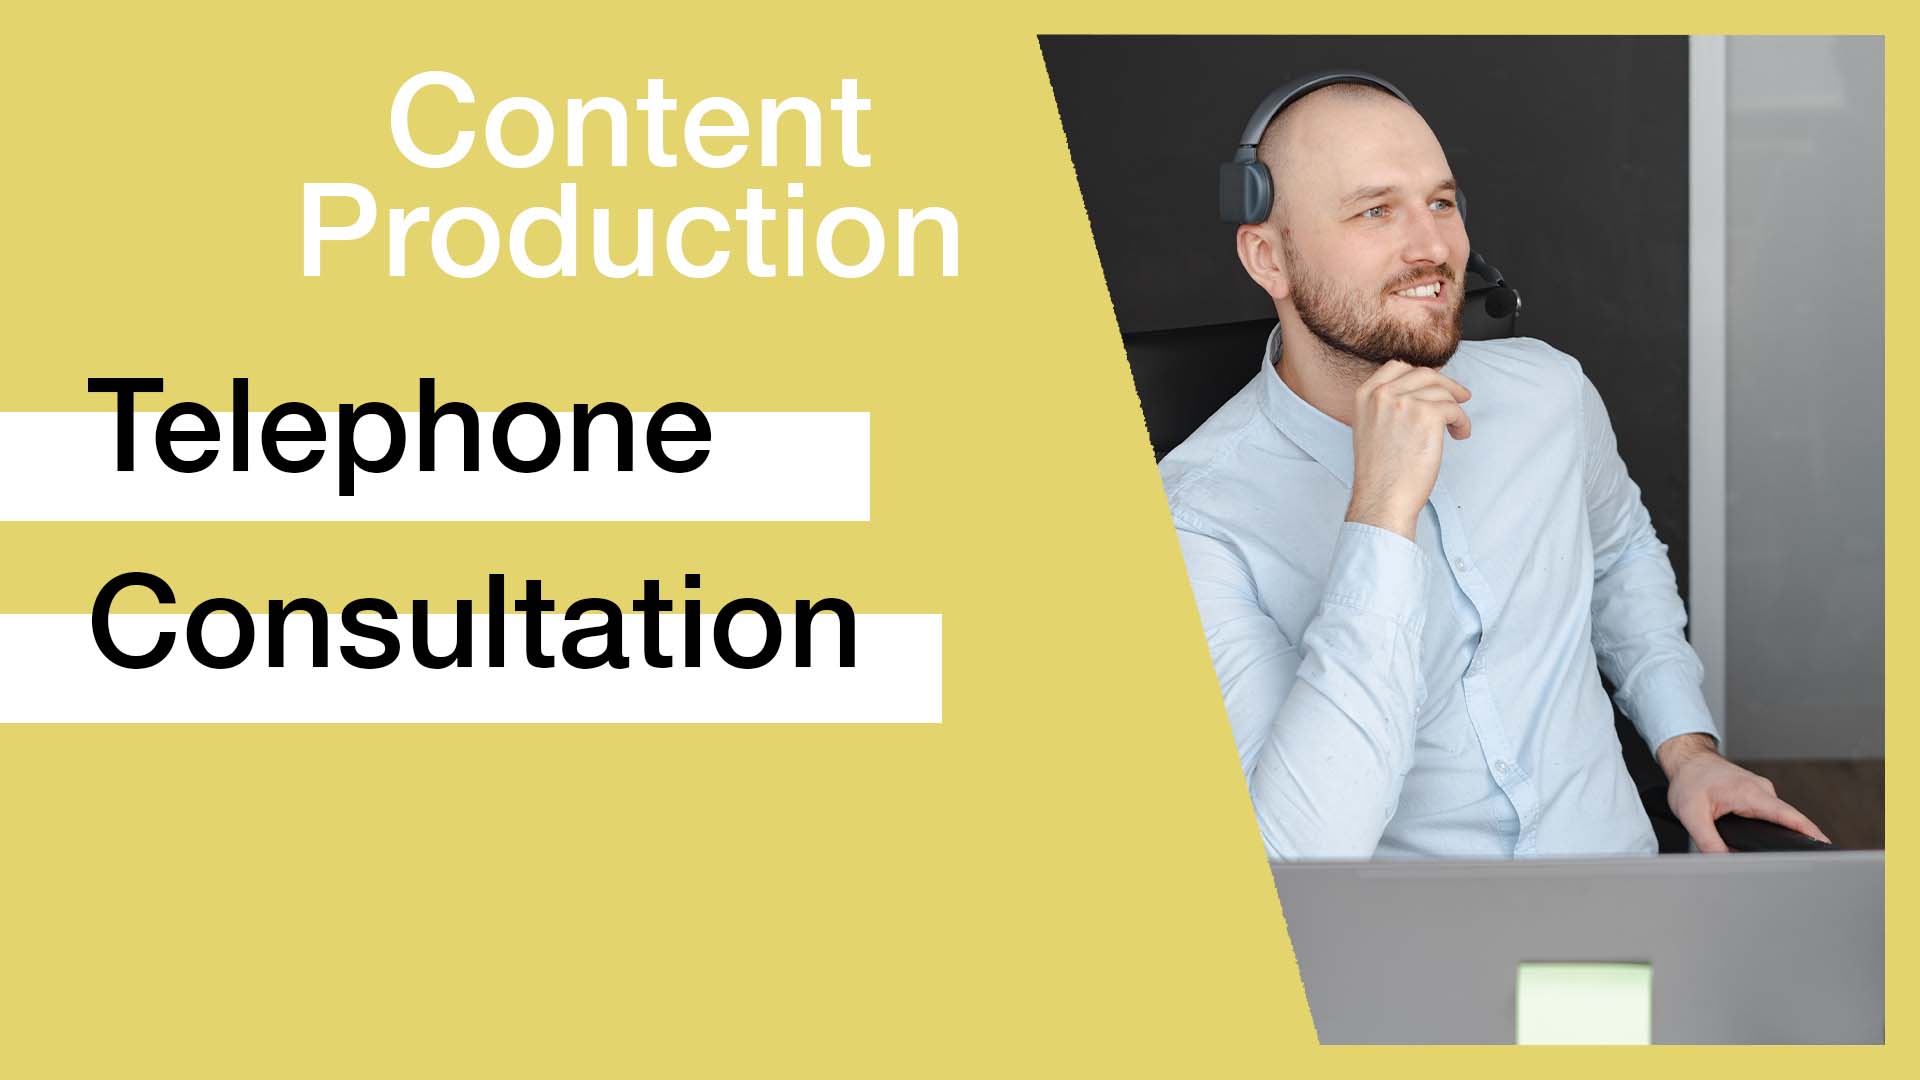 content_production_telephone_consultation_man_right_side_with_headset